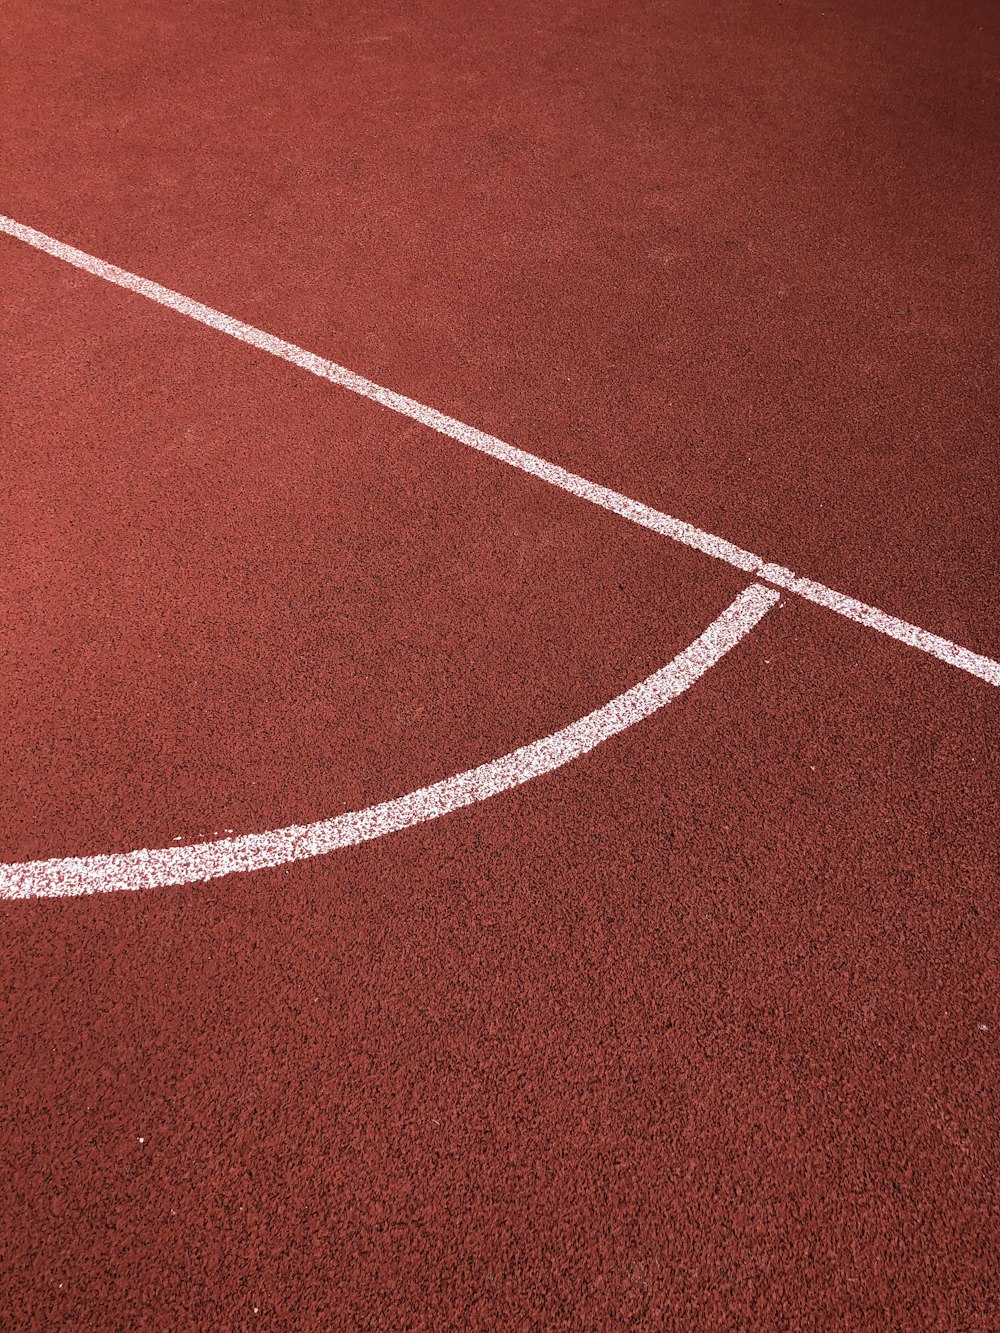 red and white track field